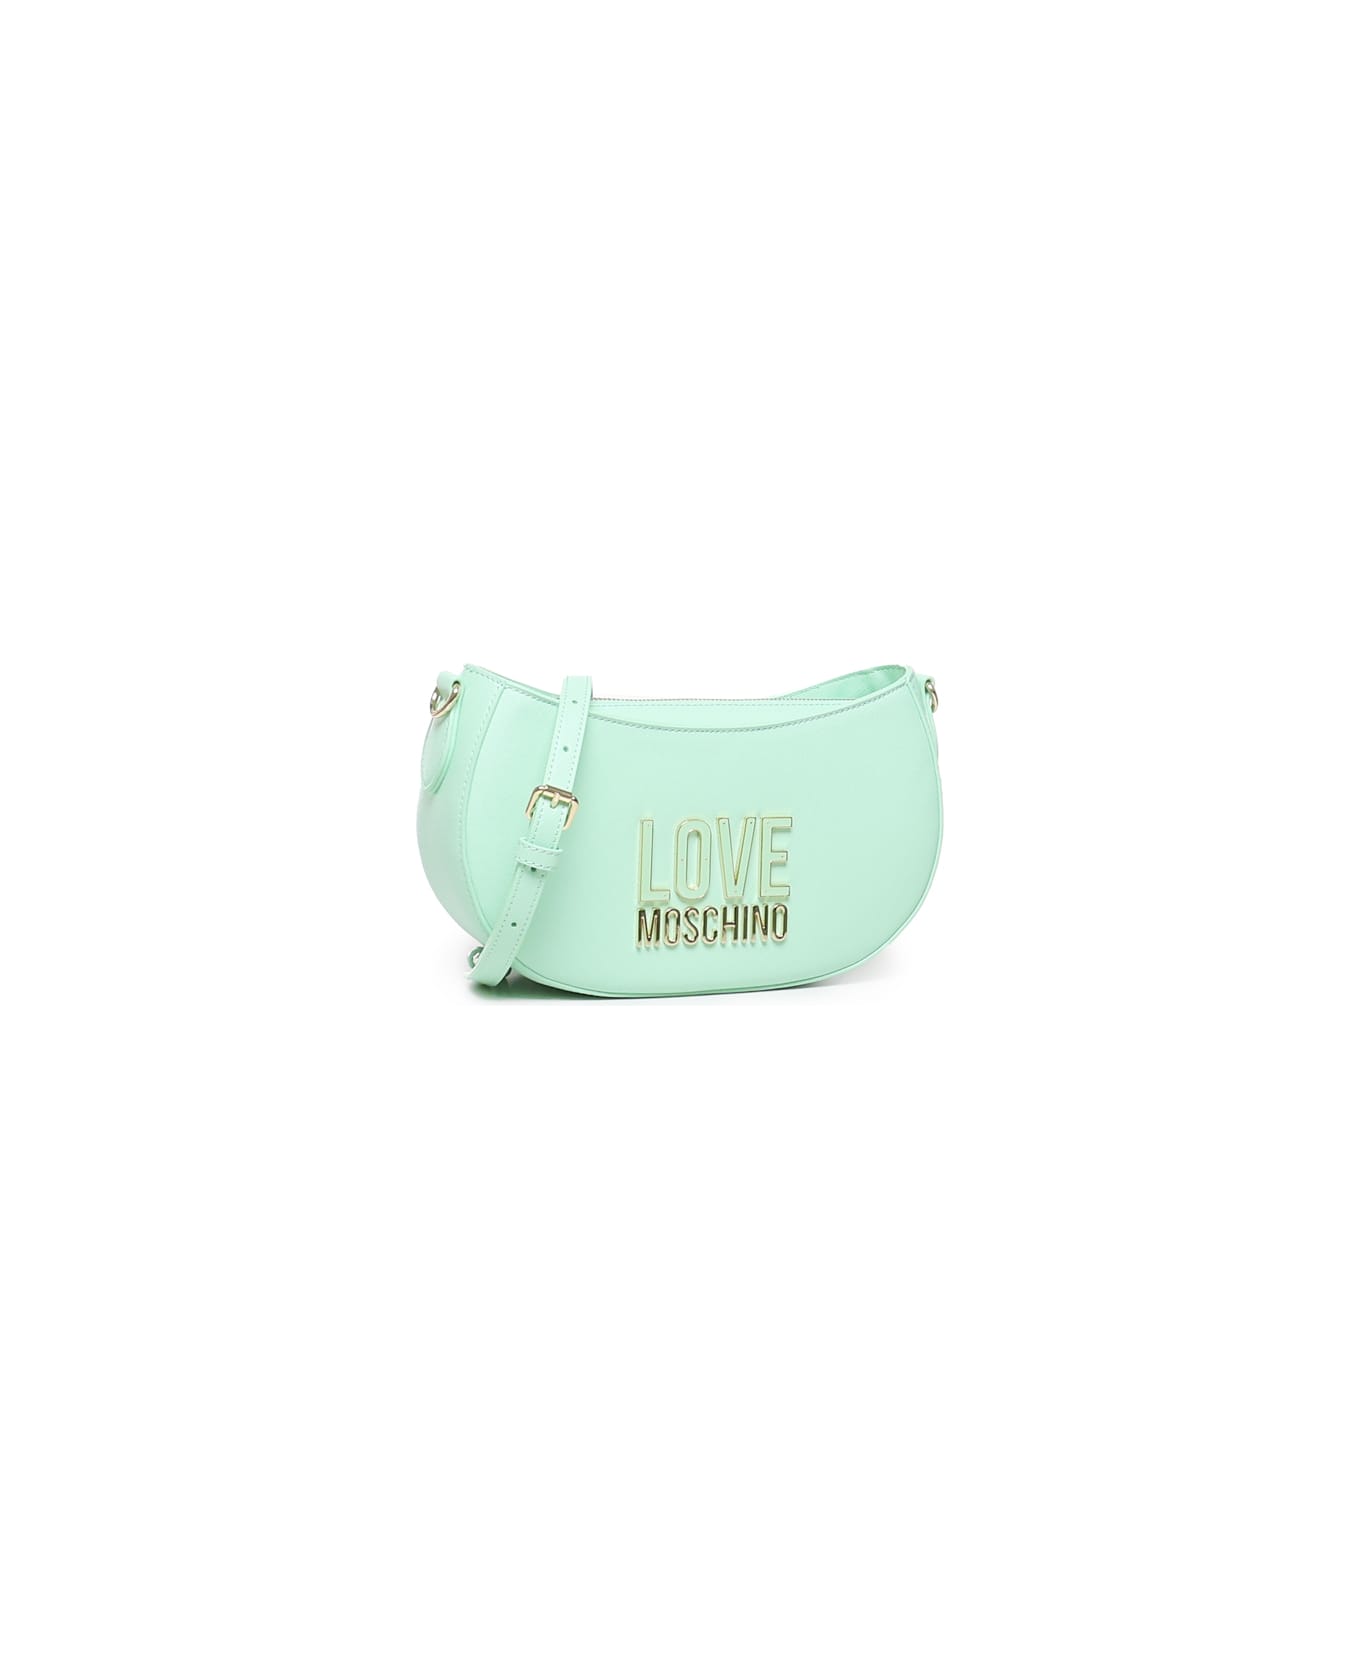 Love Moschino Jelly Shoulder Bag - Mint